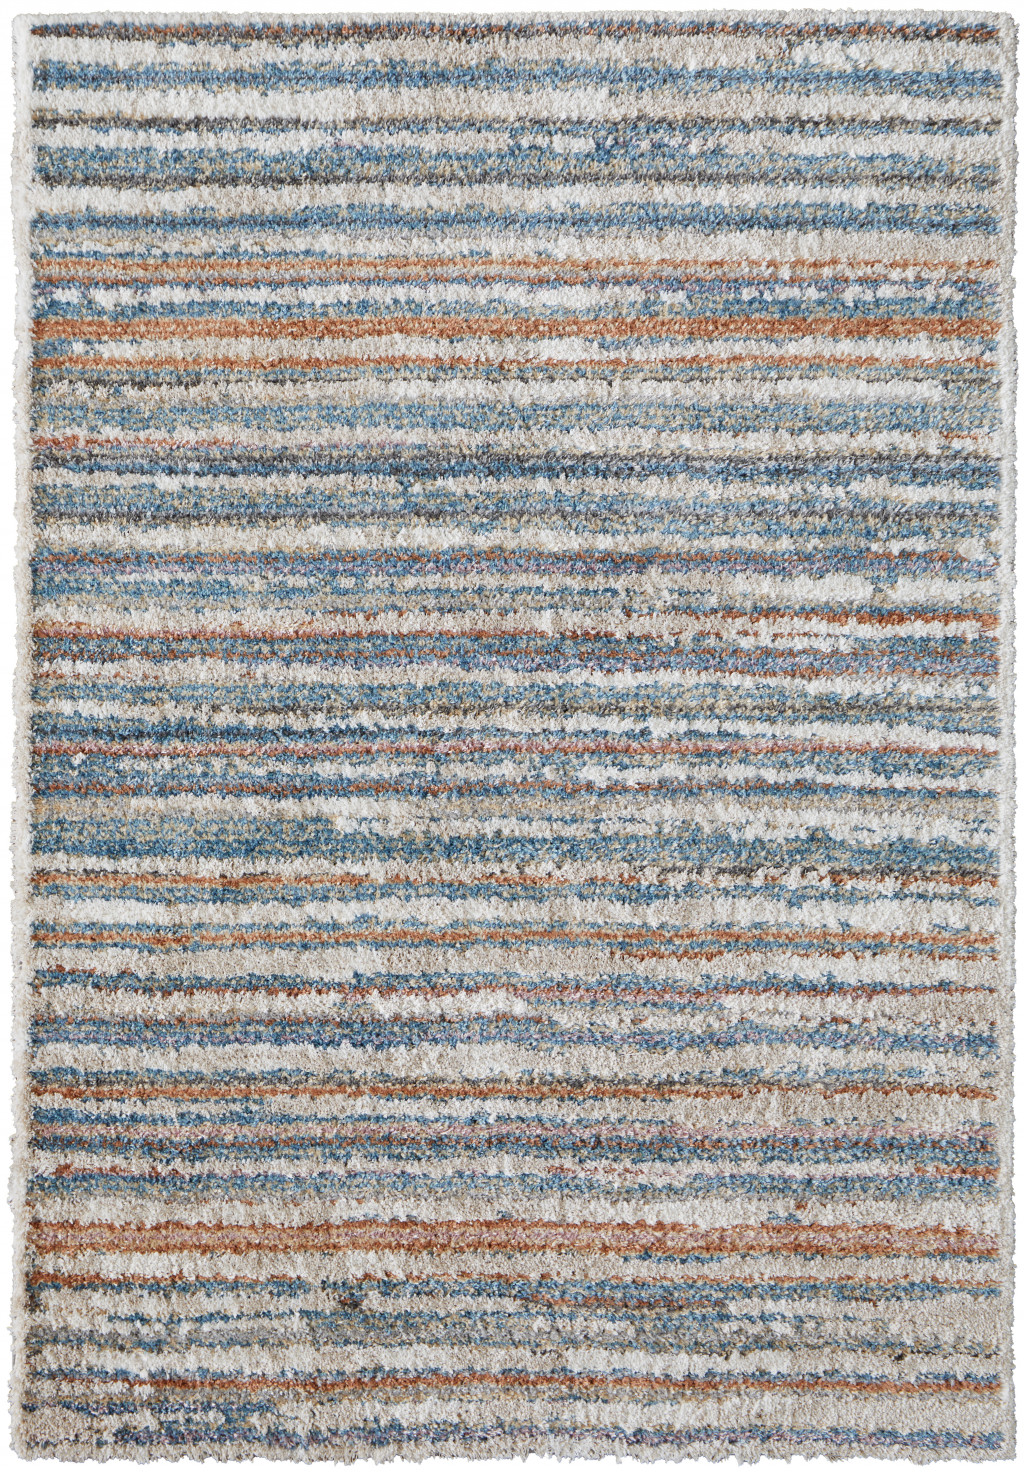 9' X 12' Ivory Blue And Orange Striped Power Loom Stain Resistant Area Rug-514529-1